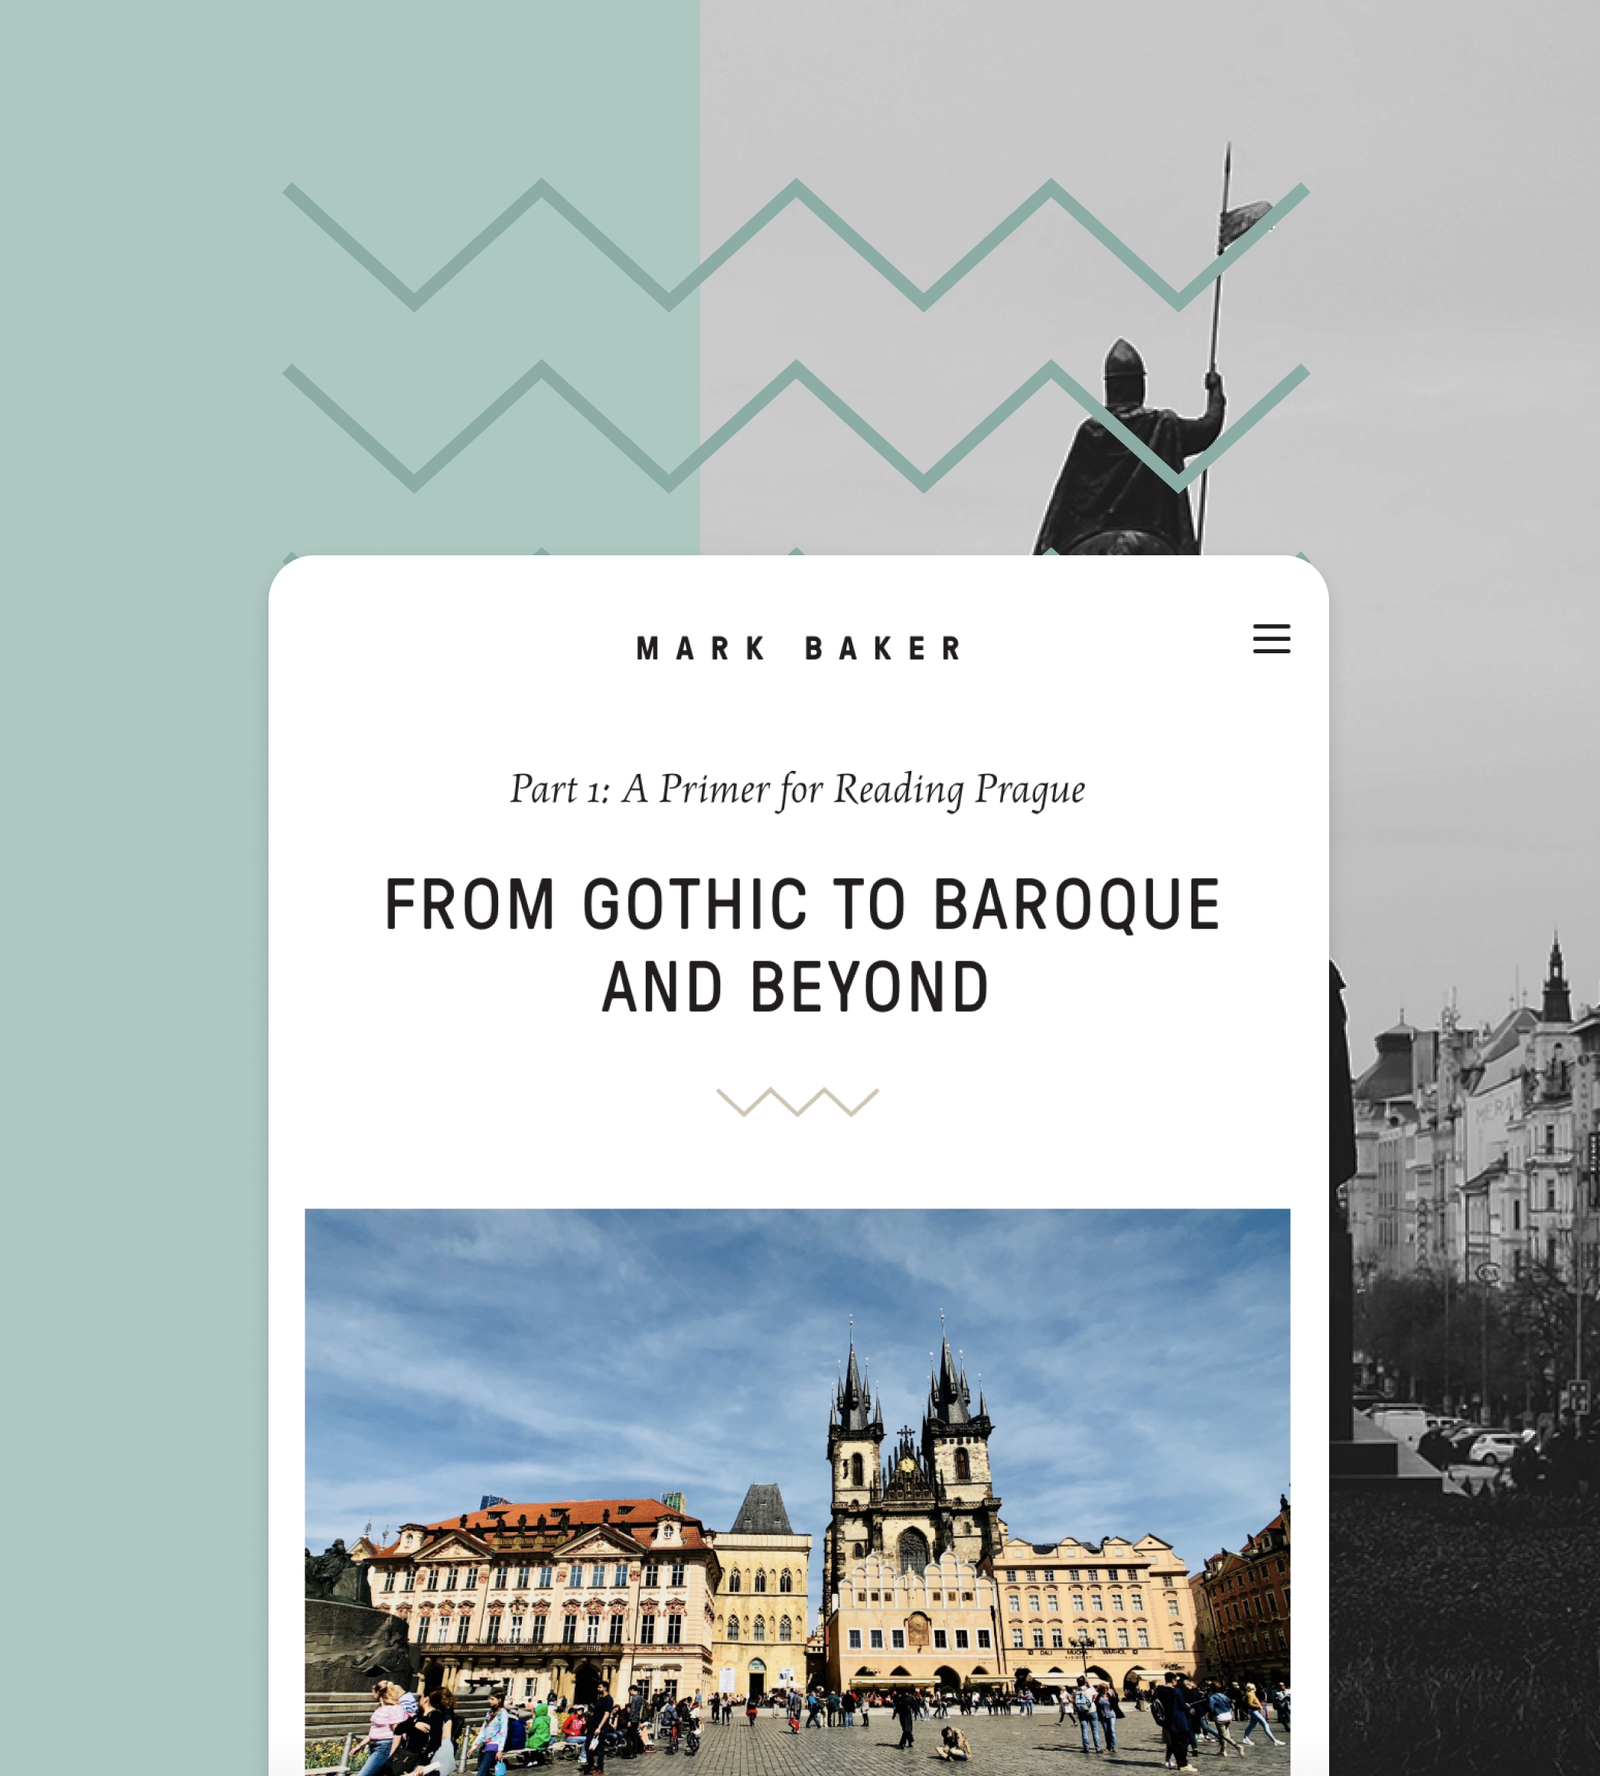 Mark Baker website layout example with picture of Prague skyline